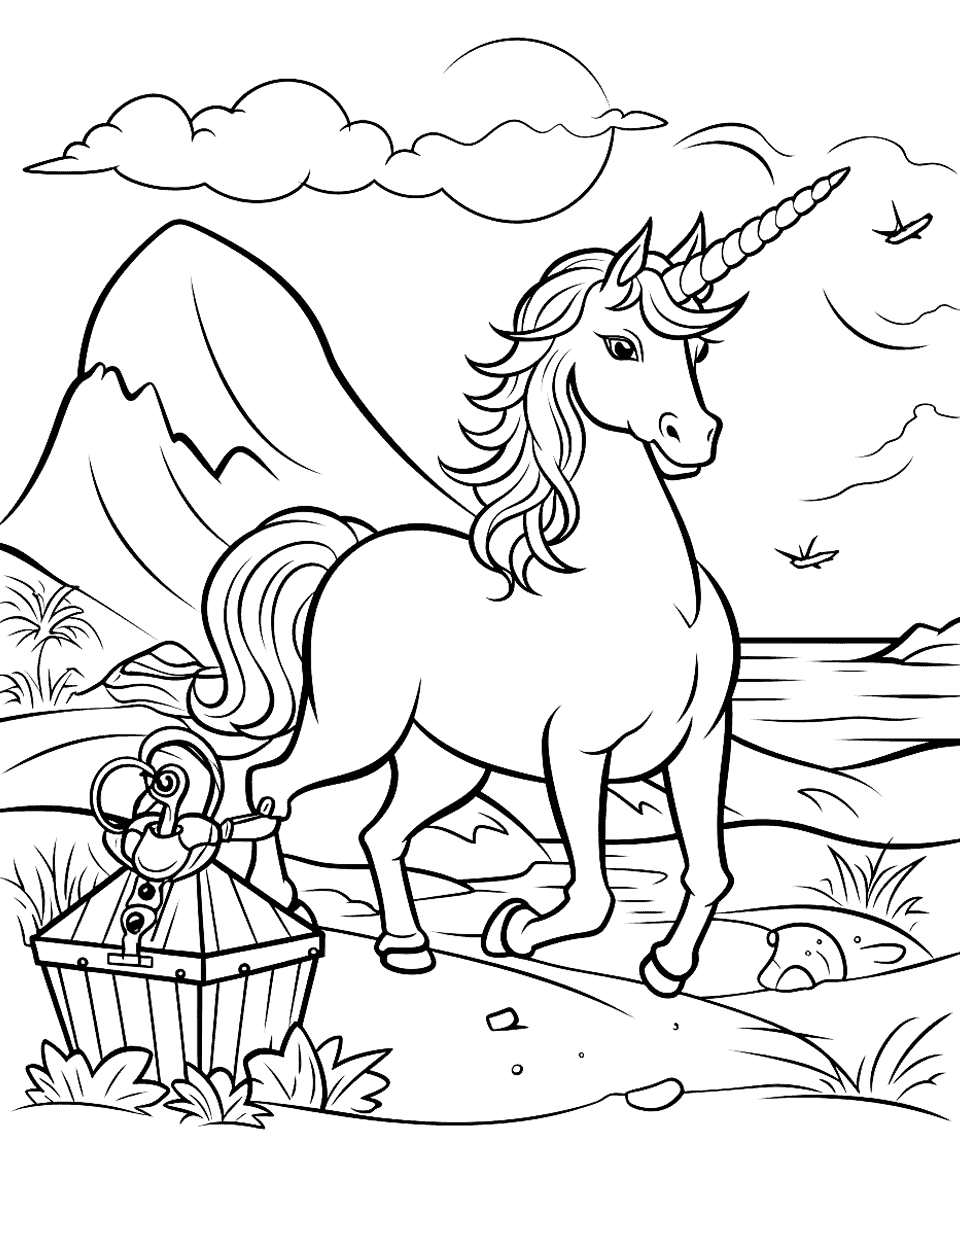 Unicorn and Pirate Treasure Coloring Page - A unicorn on a treasure hunt with a treasure chest and an island.